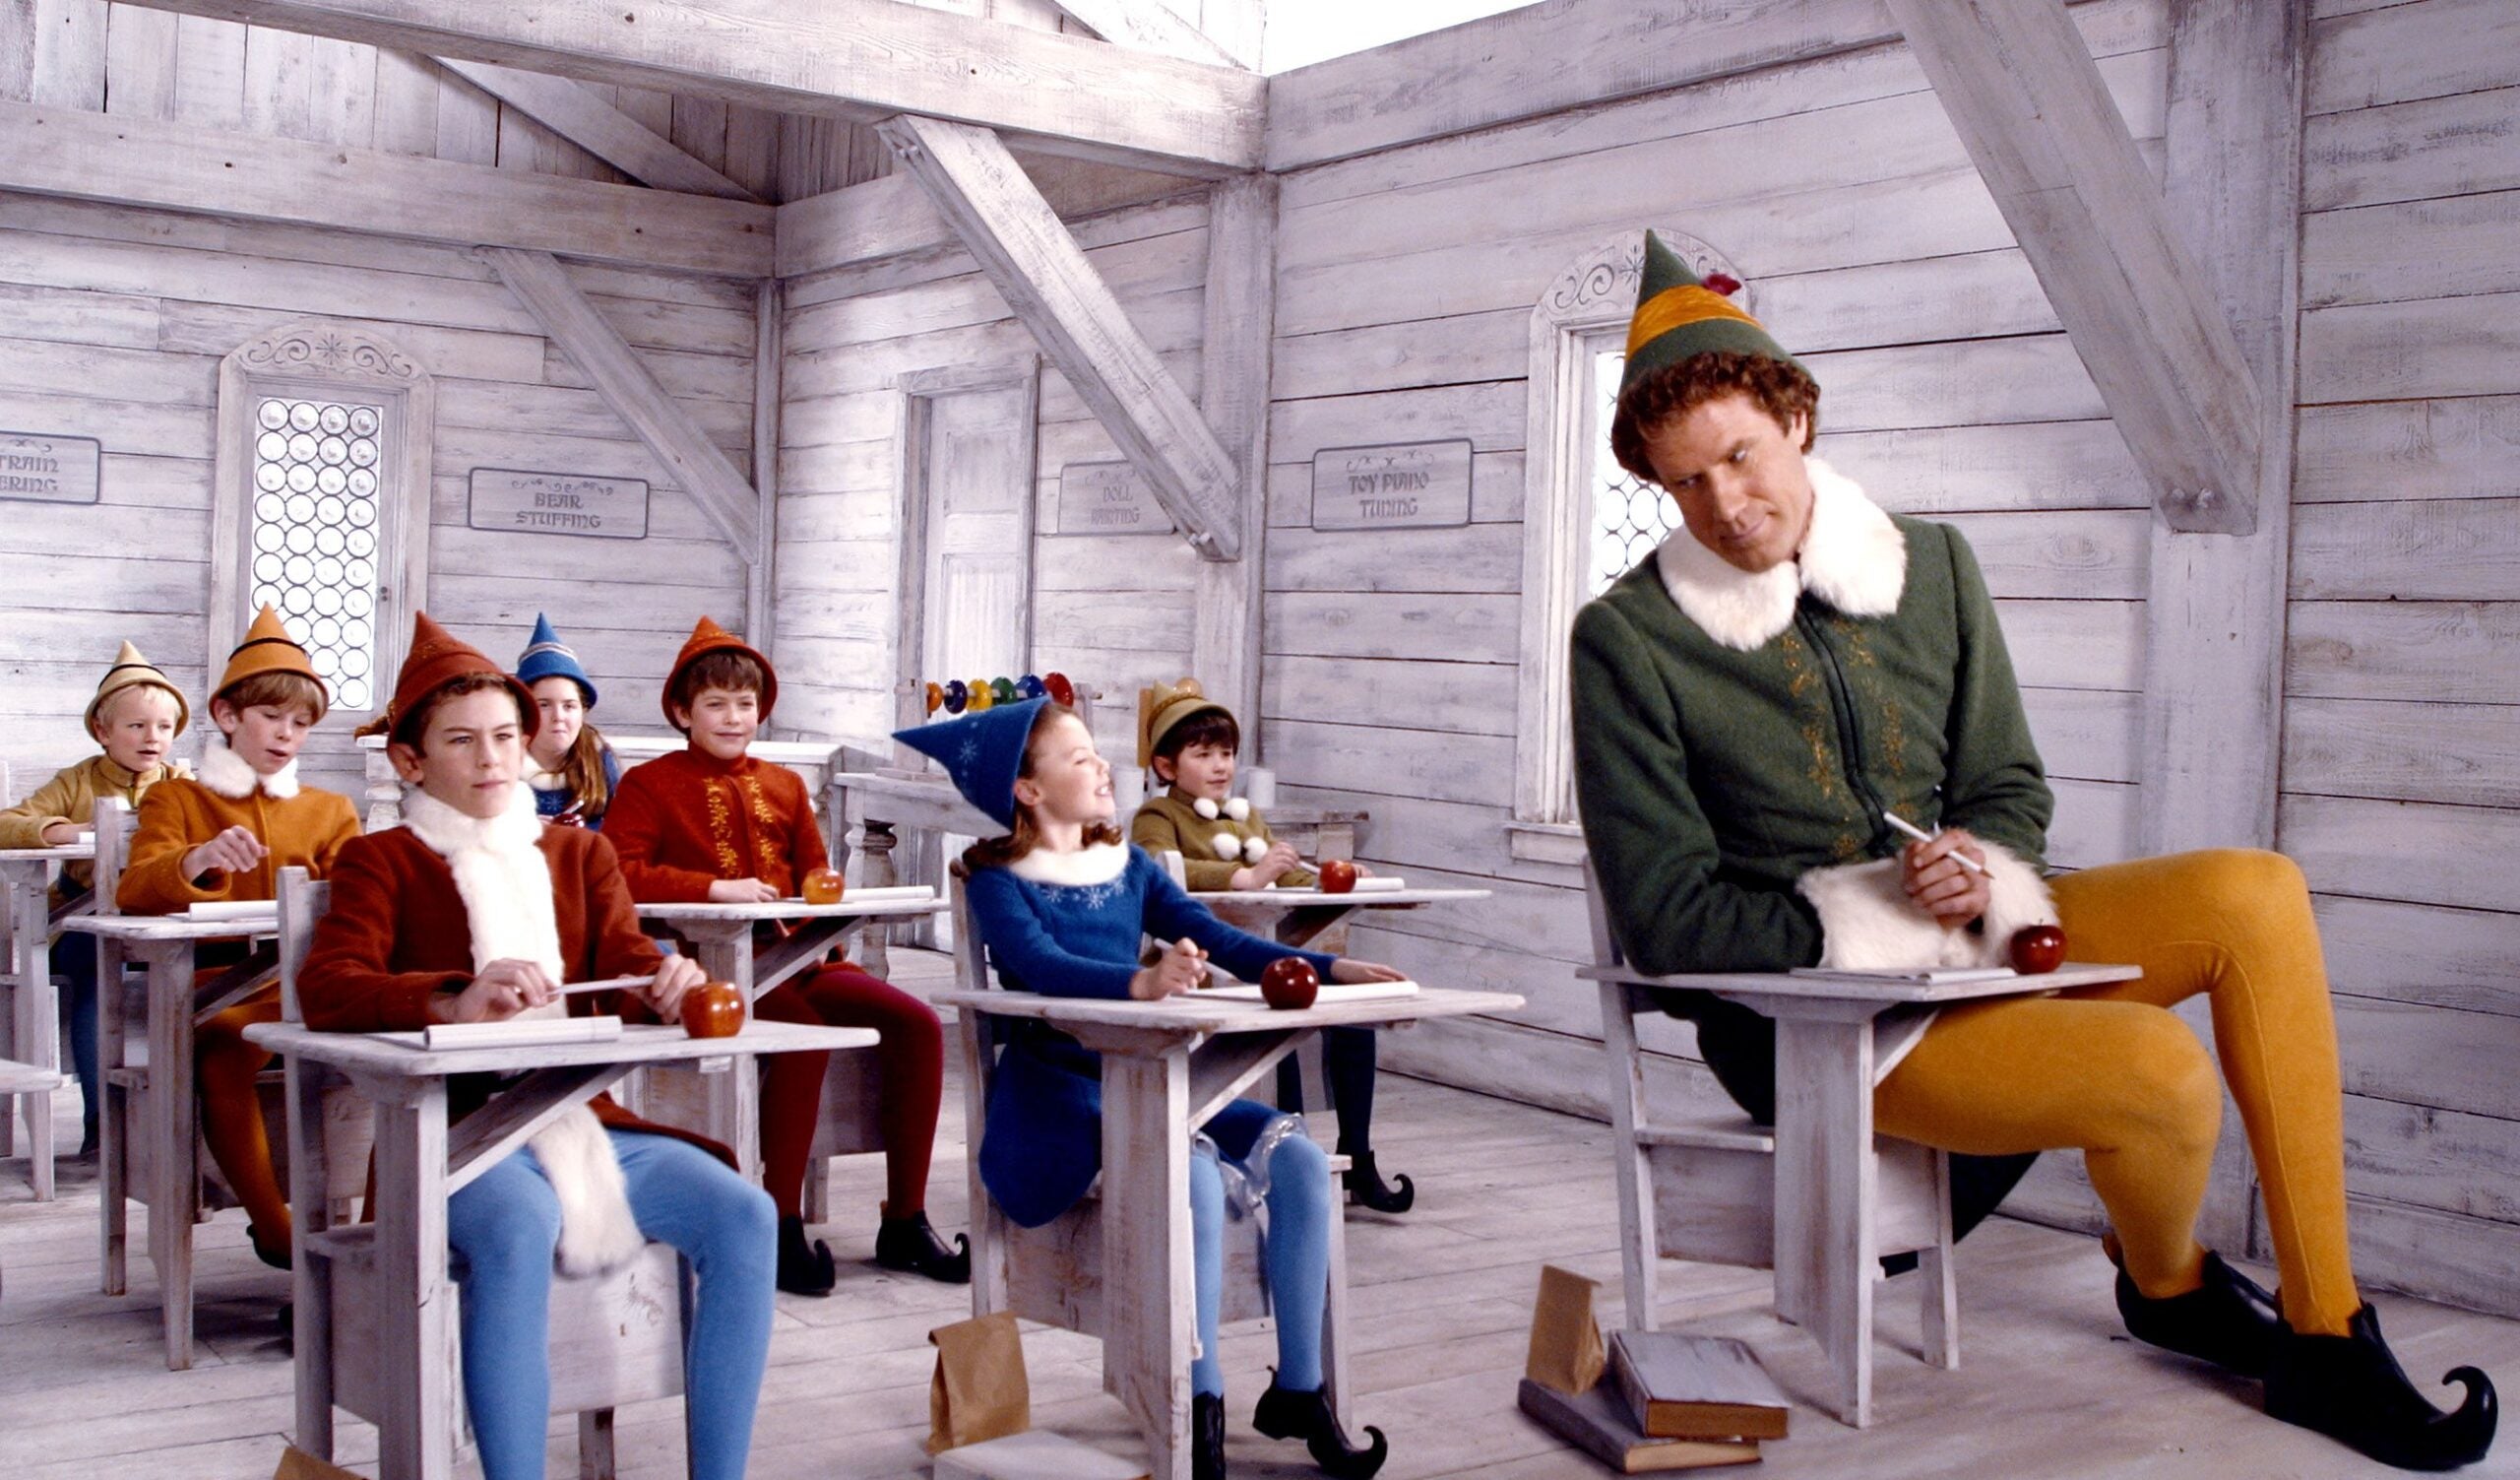 Still from the movie "Elf" in which the human-sized main character, Buddy, sits in a classroom with elf-sized children. All of the characters are dressed in elf attire.